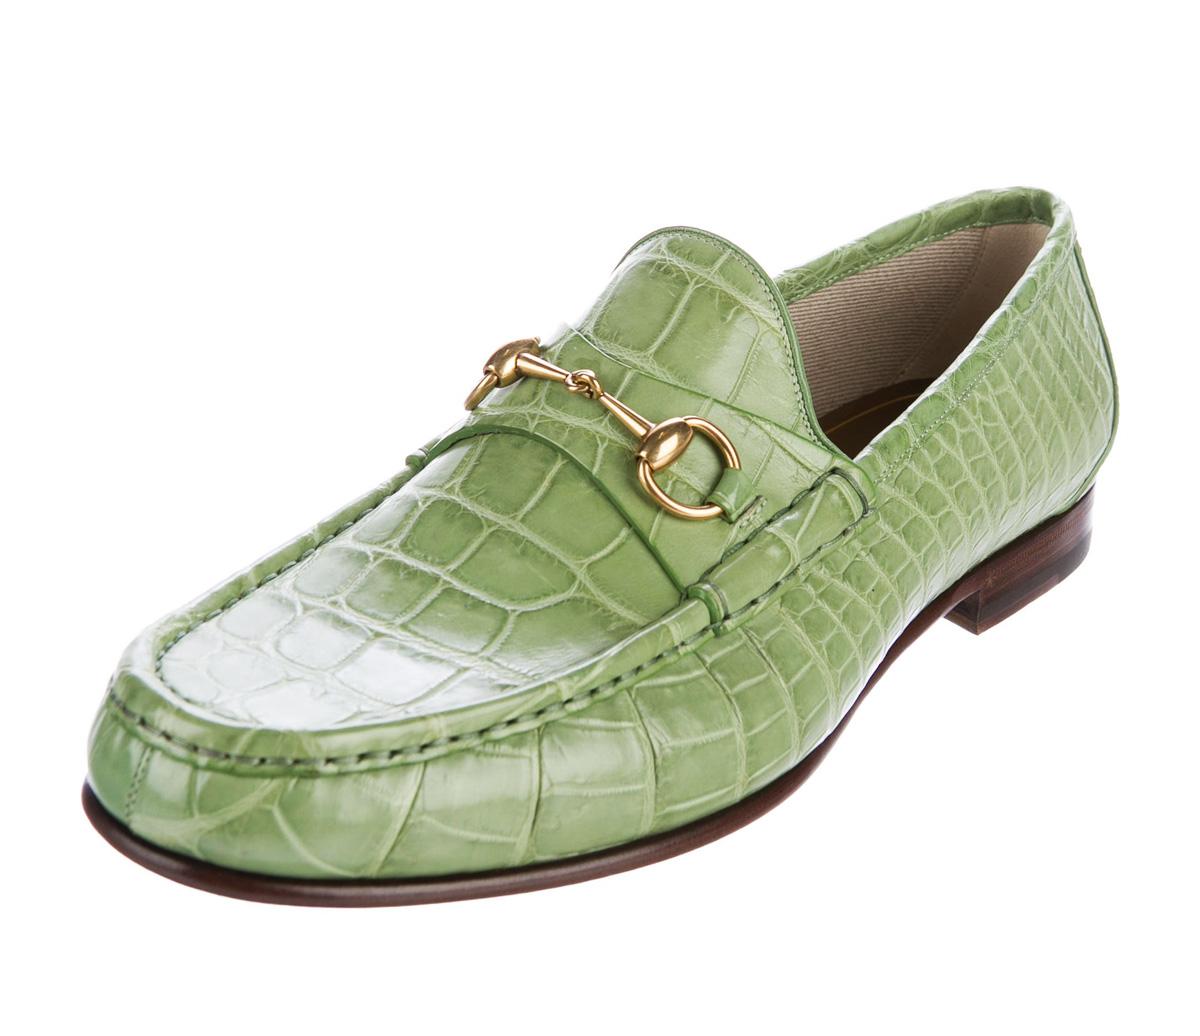 New GUCCI Horsebit CROCODILE Men's Loafers
1953 Collection - 60th ANNIVERSARY Tag
Designer Size - 6.5 ( Please know your Gucci size)
According to Gucci size guide it will be US - 7 or Italian 40.5.
Gucci size 6.5 - insole length 10.5 inches
Designer